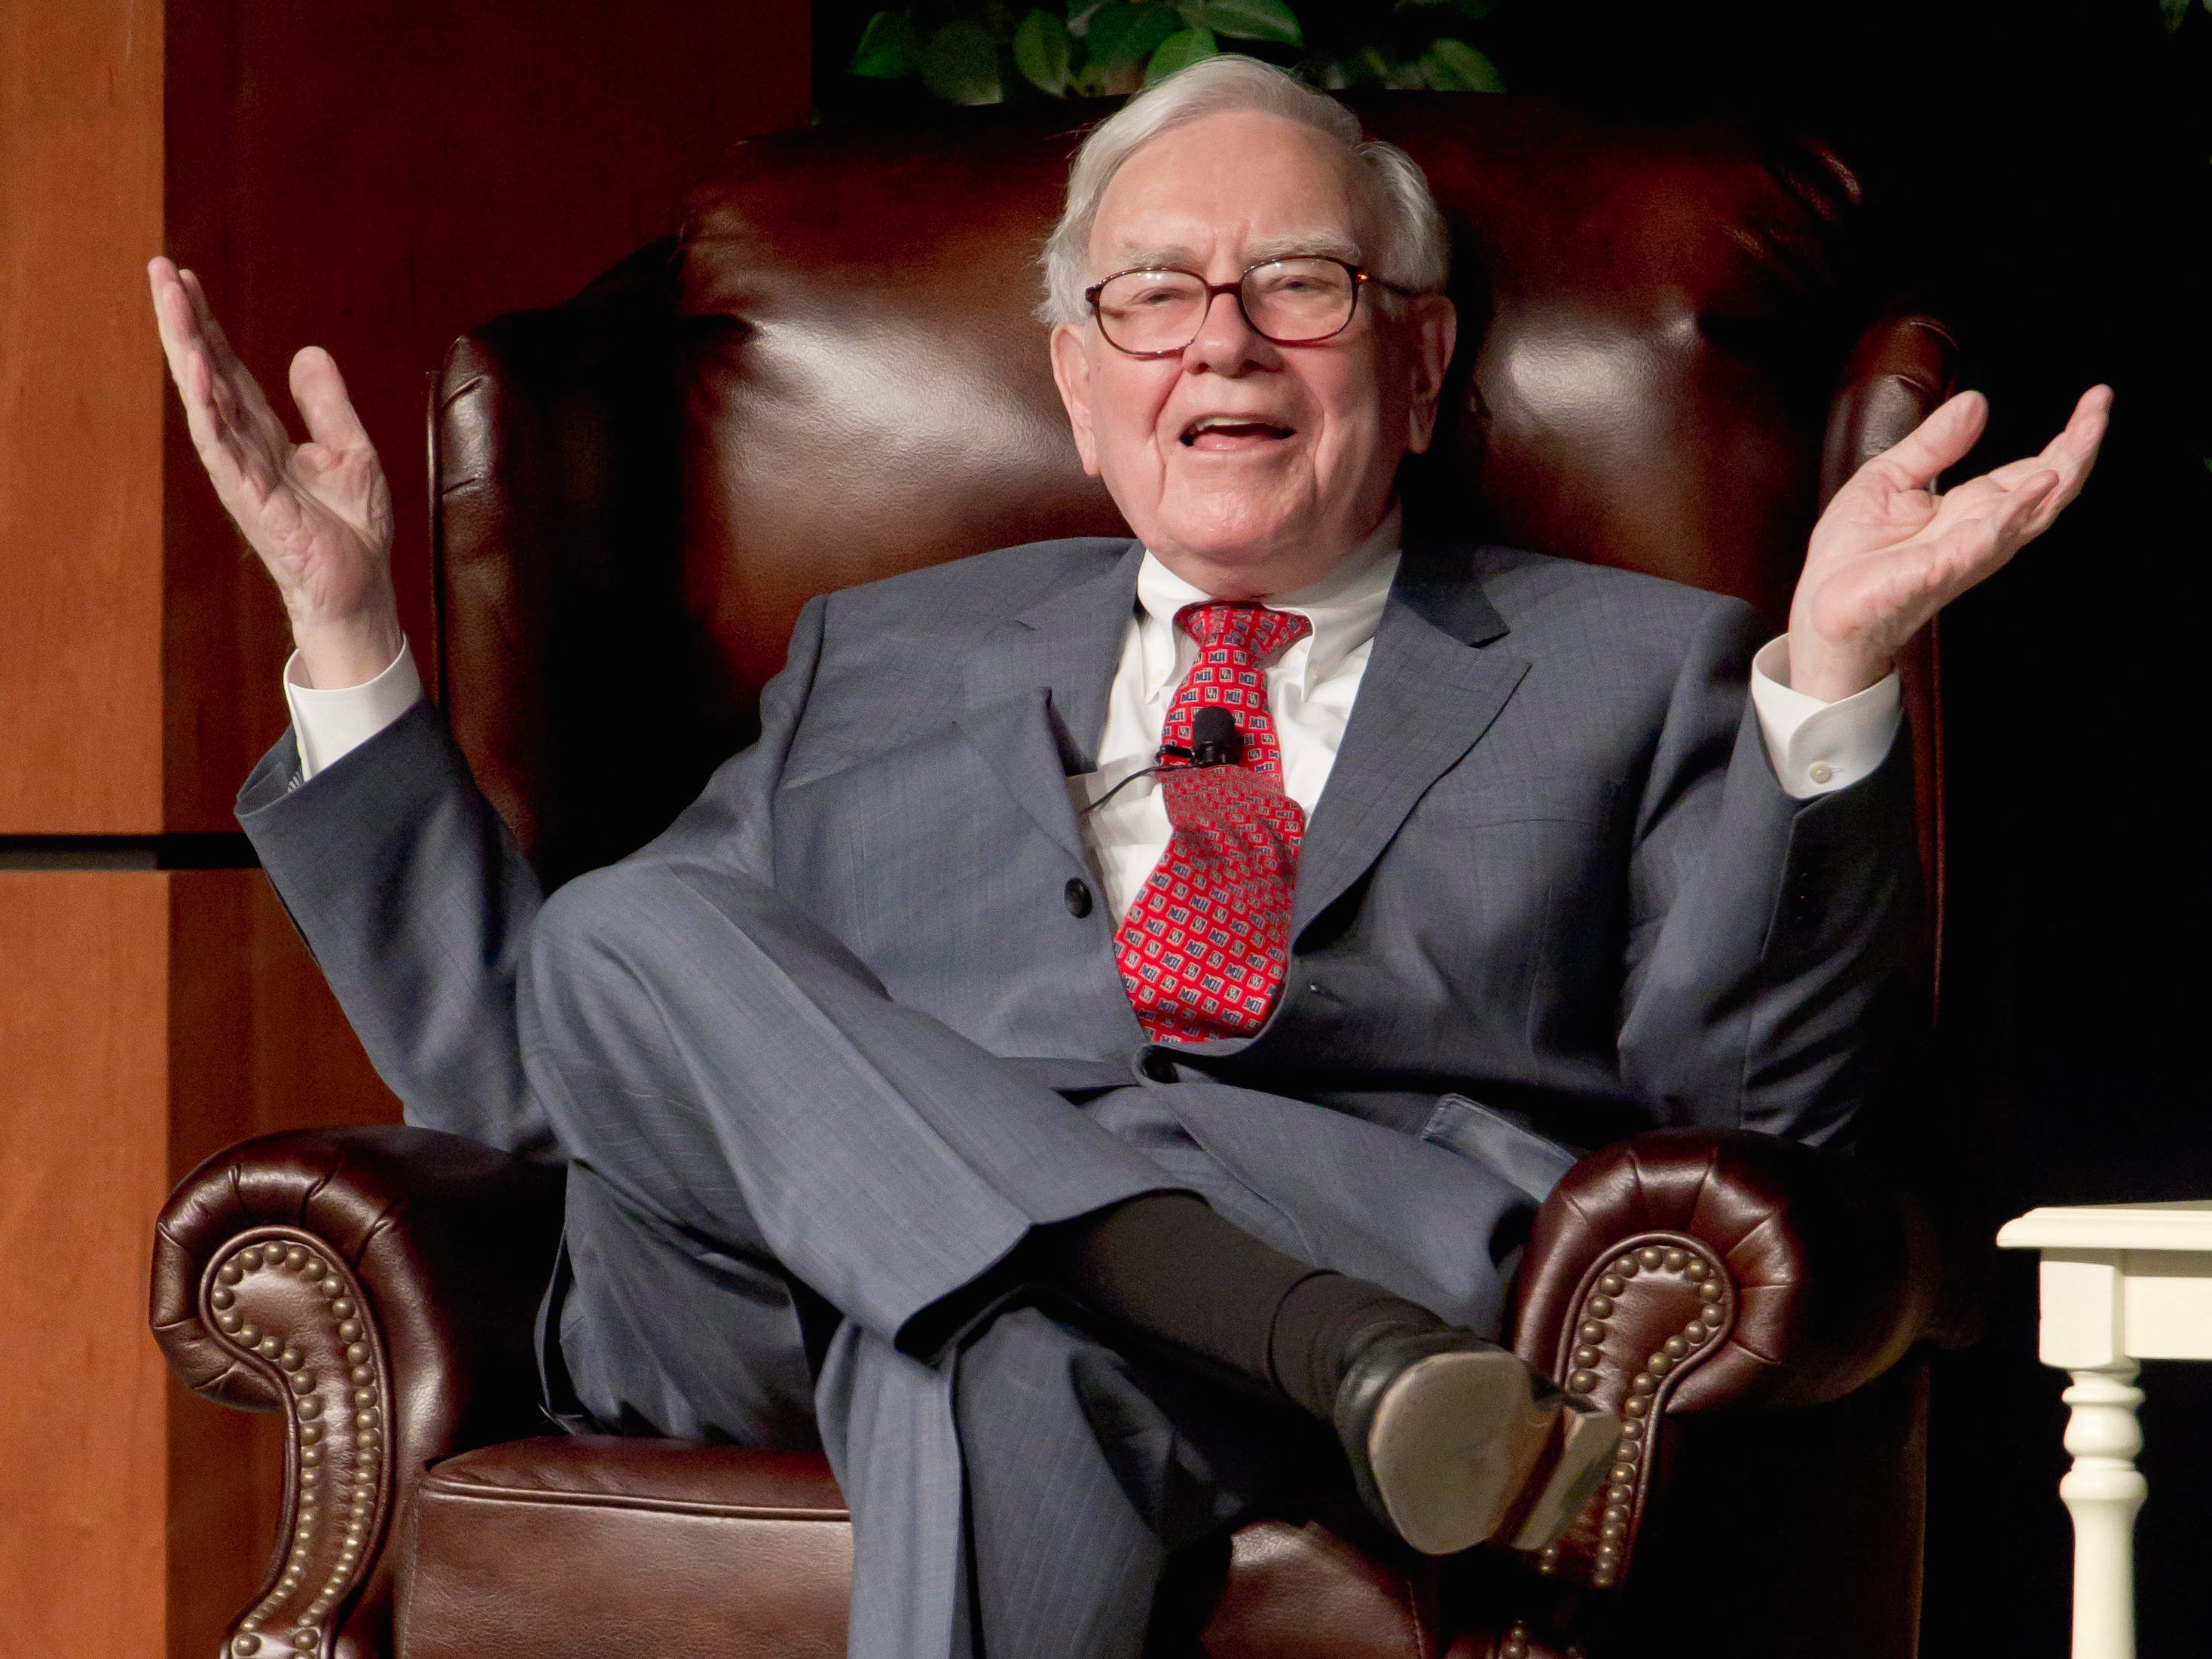 <p>Buffett has said he has about 20 suits, all made in China by designer Madame Li, according to <a href="https://www.cnbc.com/2017/02/27/warren-buffett-only-wears-suits-made-by-a-chinese-entrepreneur.html" rel="noopener">CNBC</a>. He has a longstanding friendship with Li, an entrepreneur who worked her way up in the business. He's gotten the same <a href="https://www.marketwatch.com/story/warren-buffetts-two-omahas-2015-05-19?page=1" rel="noopener">$18 hair cut</a> for years from a barber shop in the same building as his office.</p>